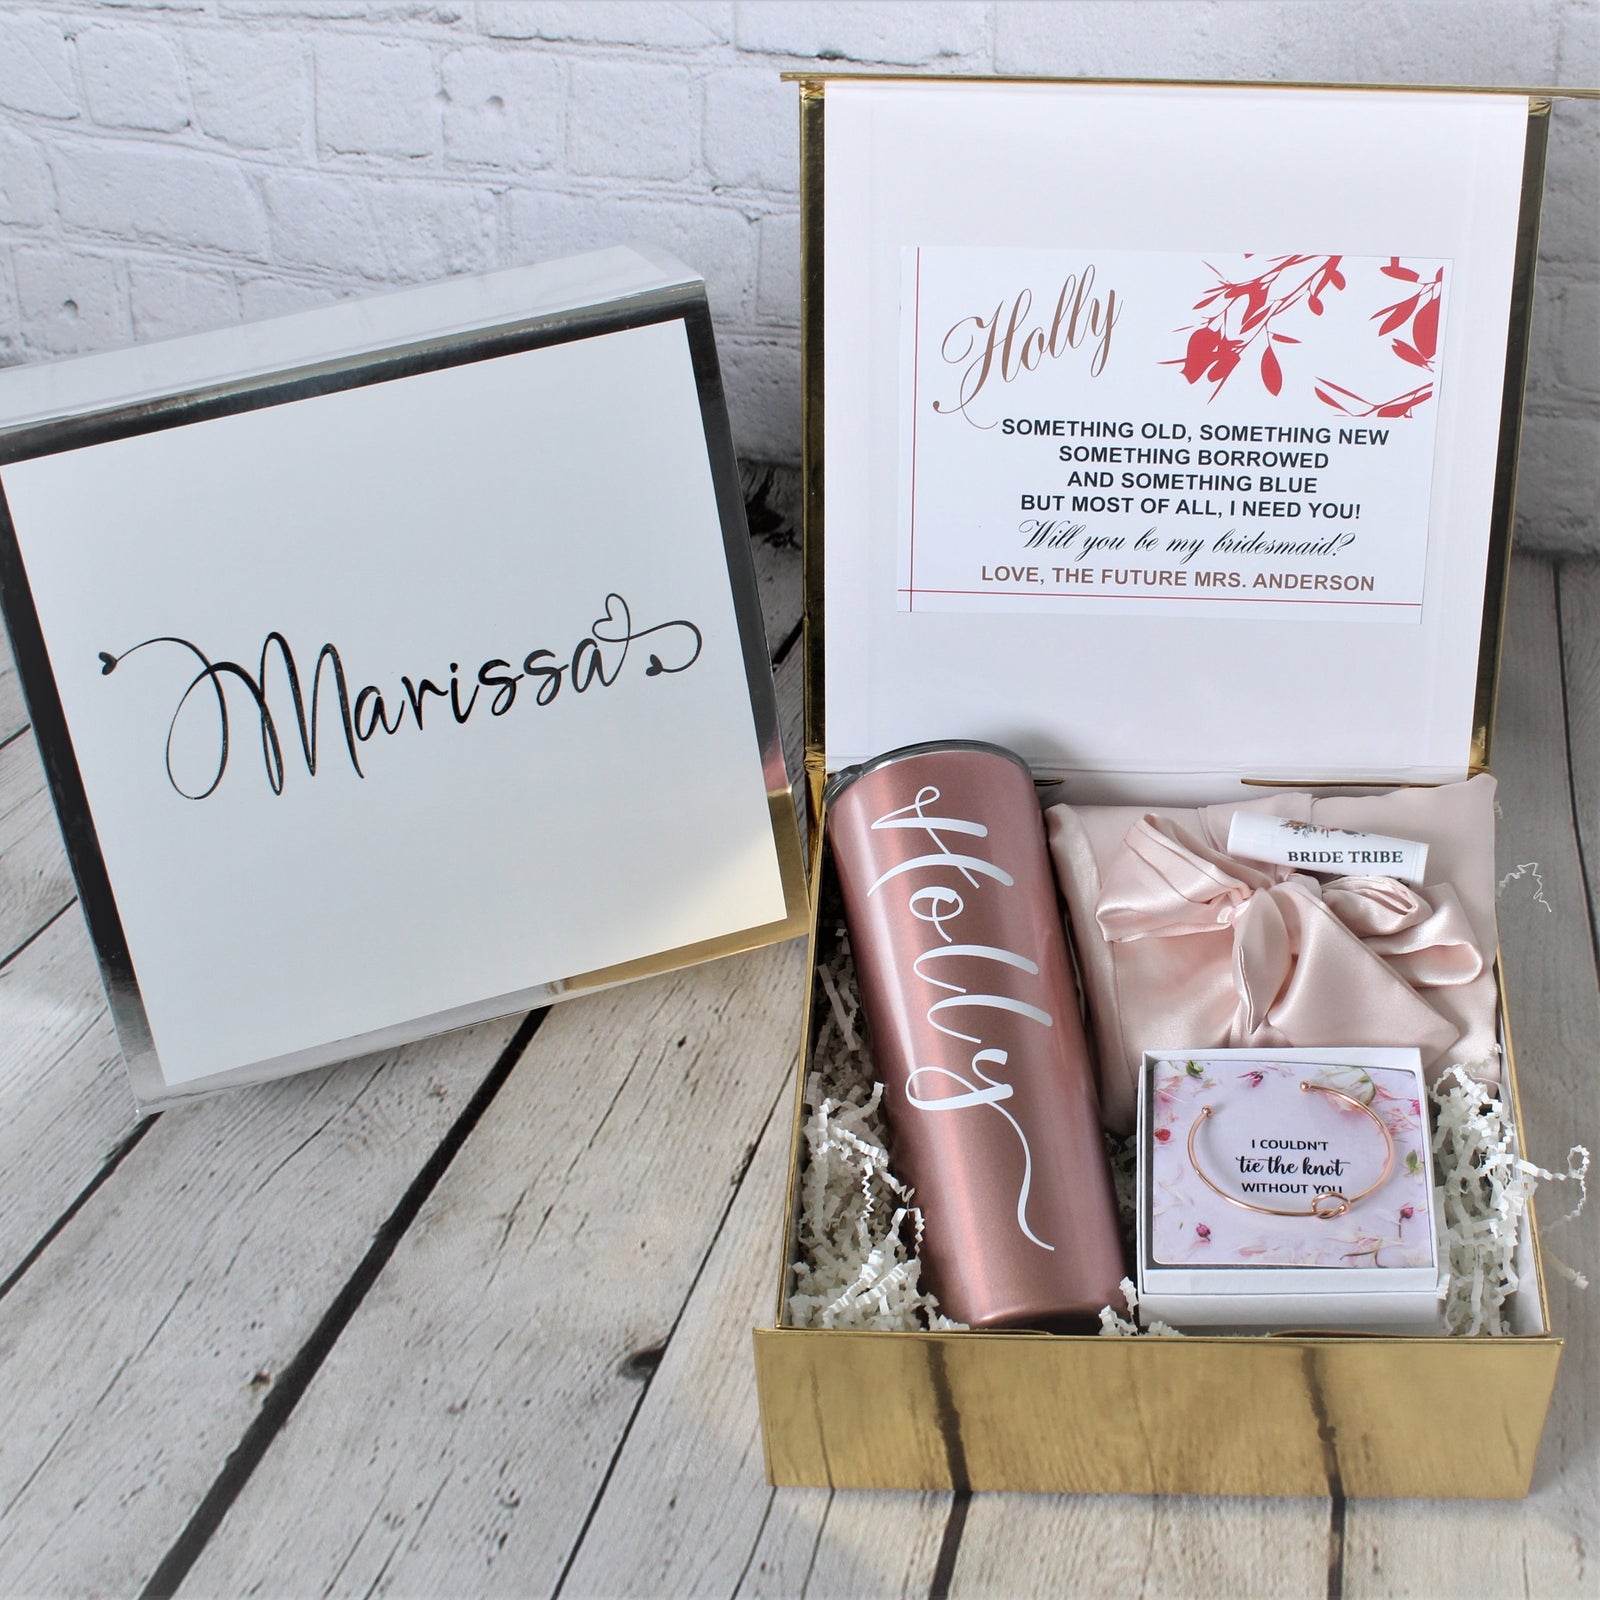 Will you be my Bridesmaid? Wooden Gift Box